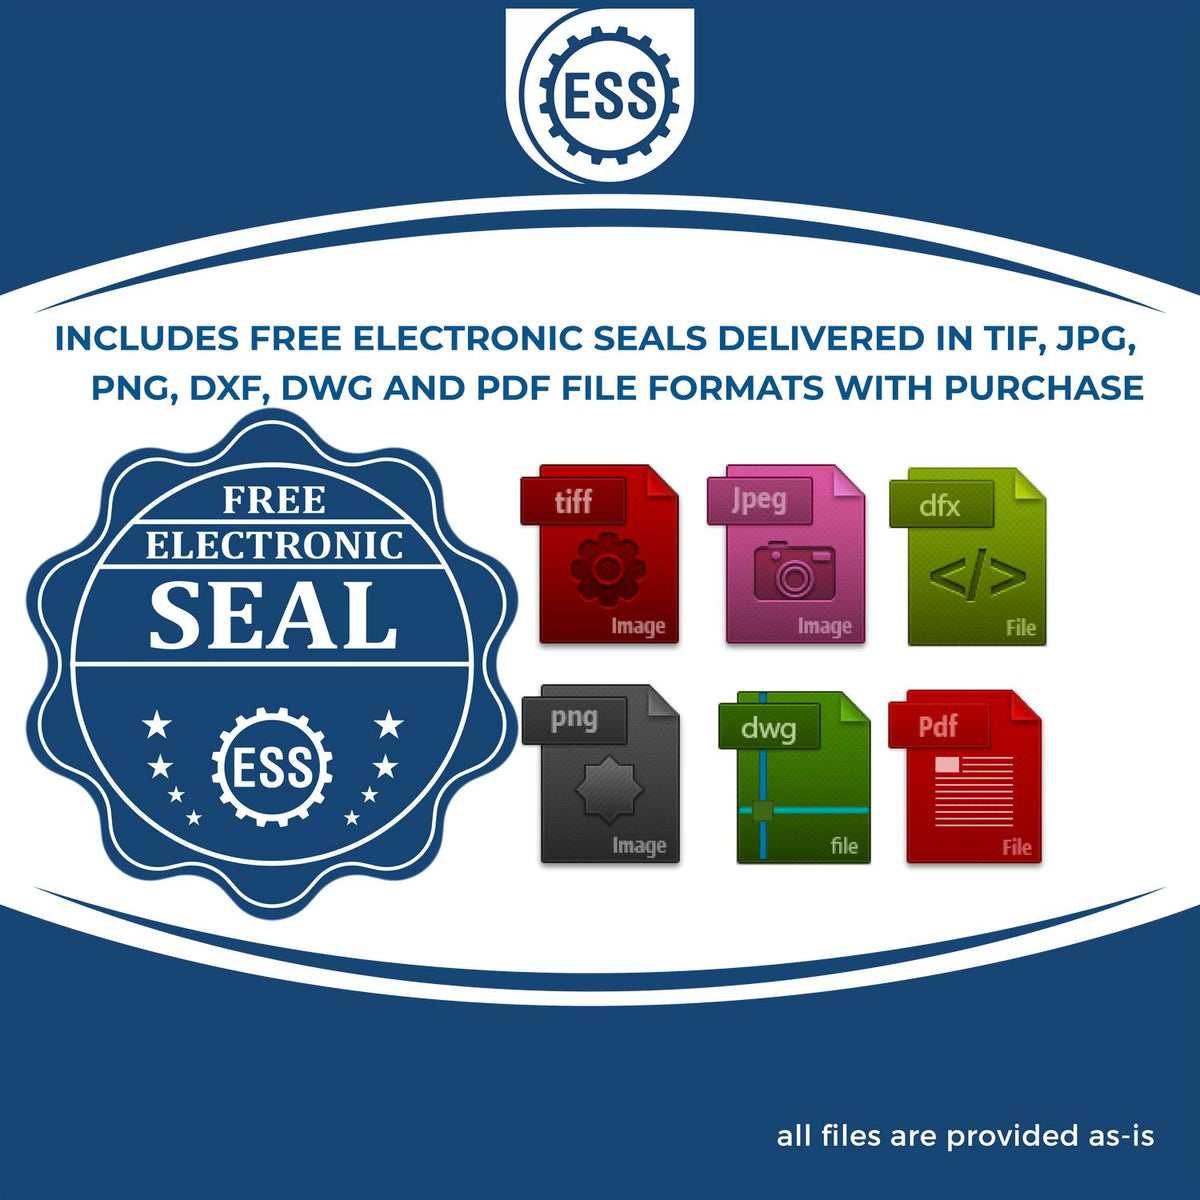 An infographic for the free electronic seal for the Extended Long Reach Kentucky Architect Seal Embosser illustrating the different file type icons such as DXF, DWG, TIF, JPG and PNG.